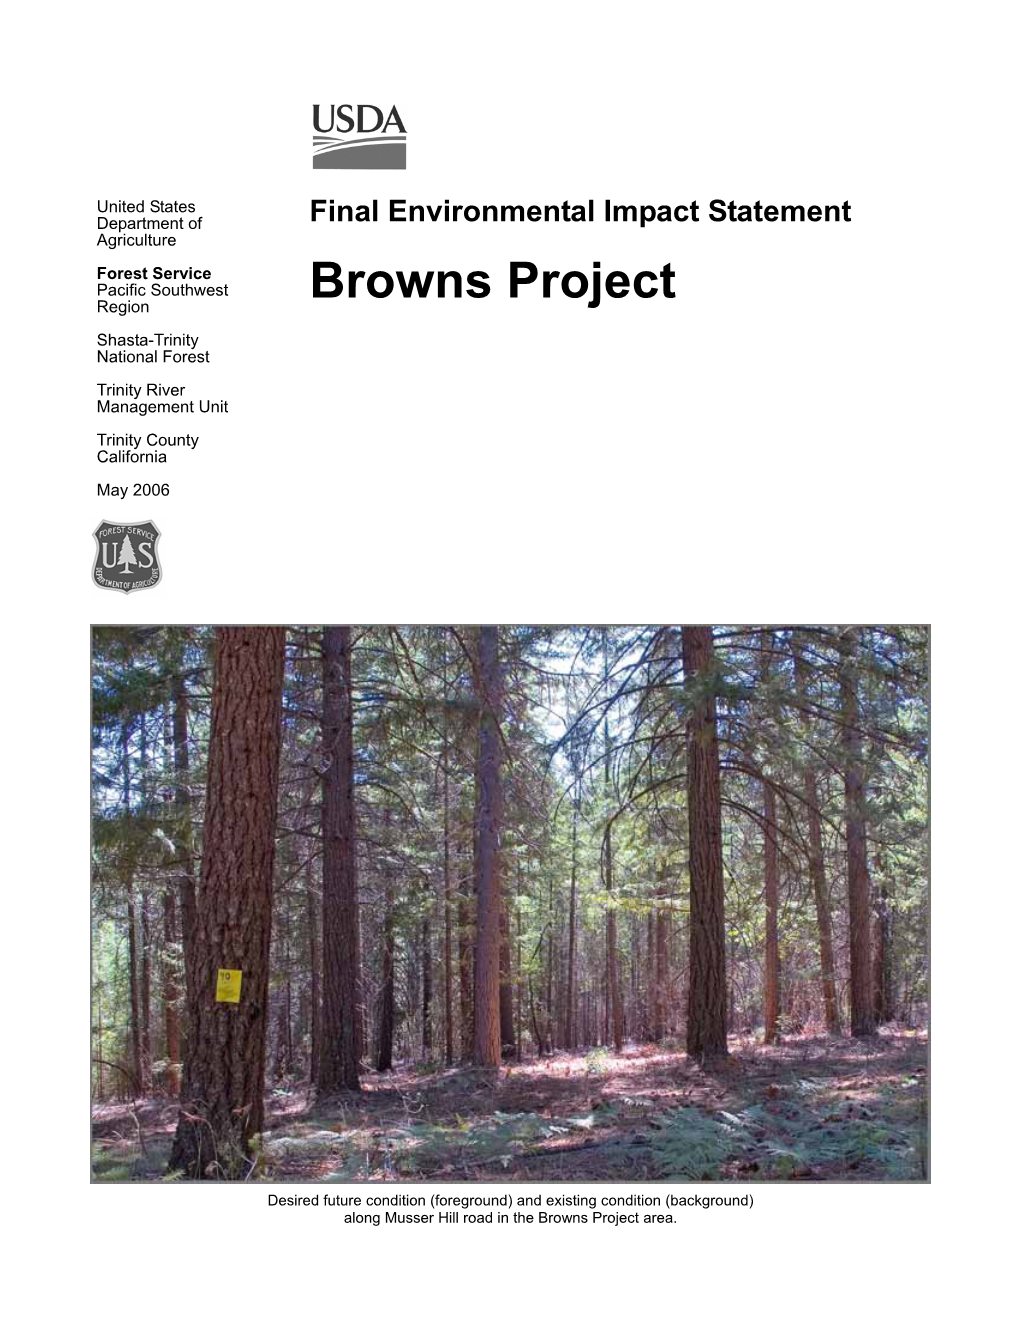 Browns Project Final Environmental Impact Statement – May 2006